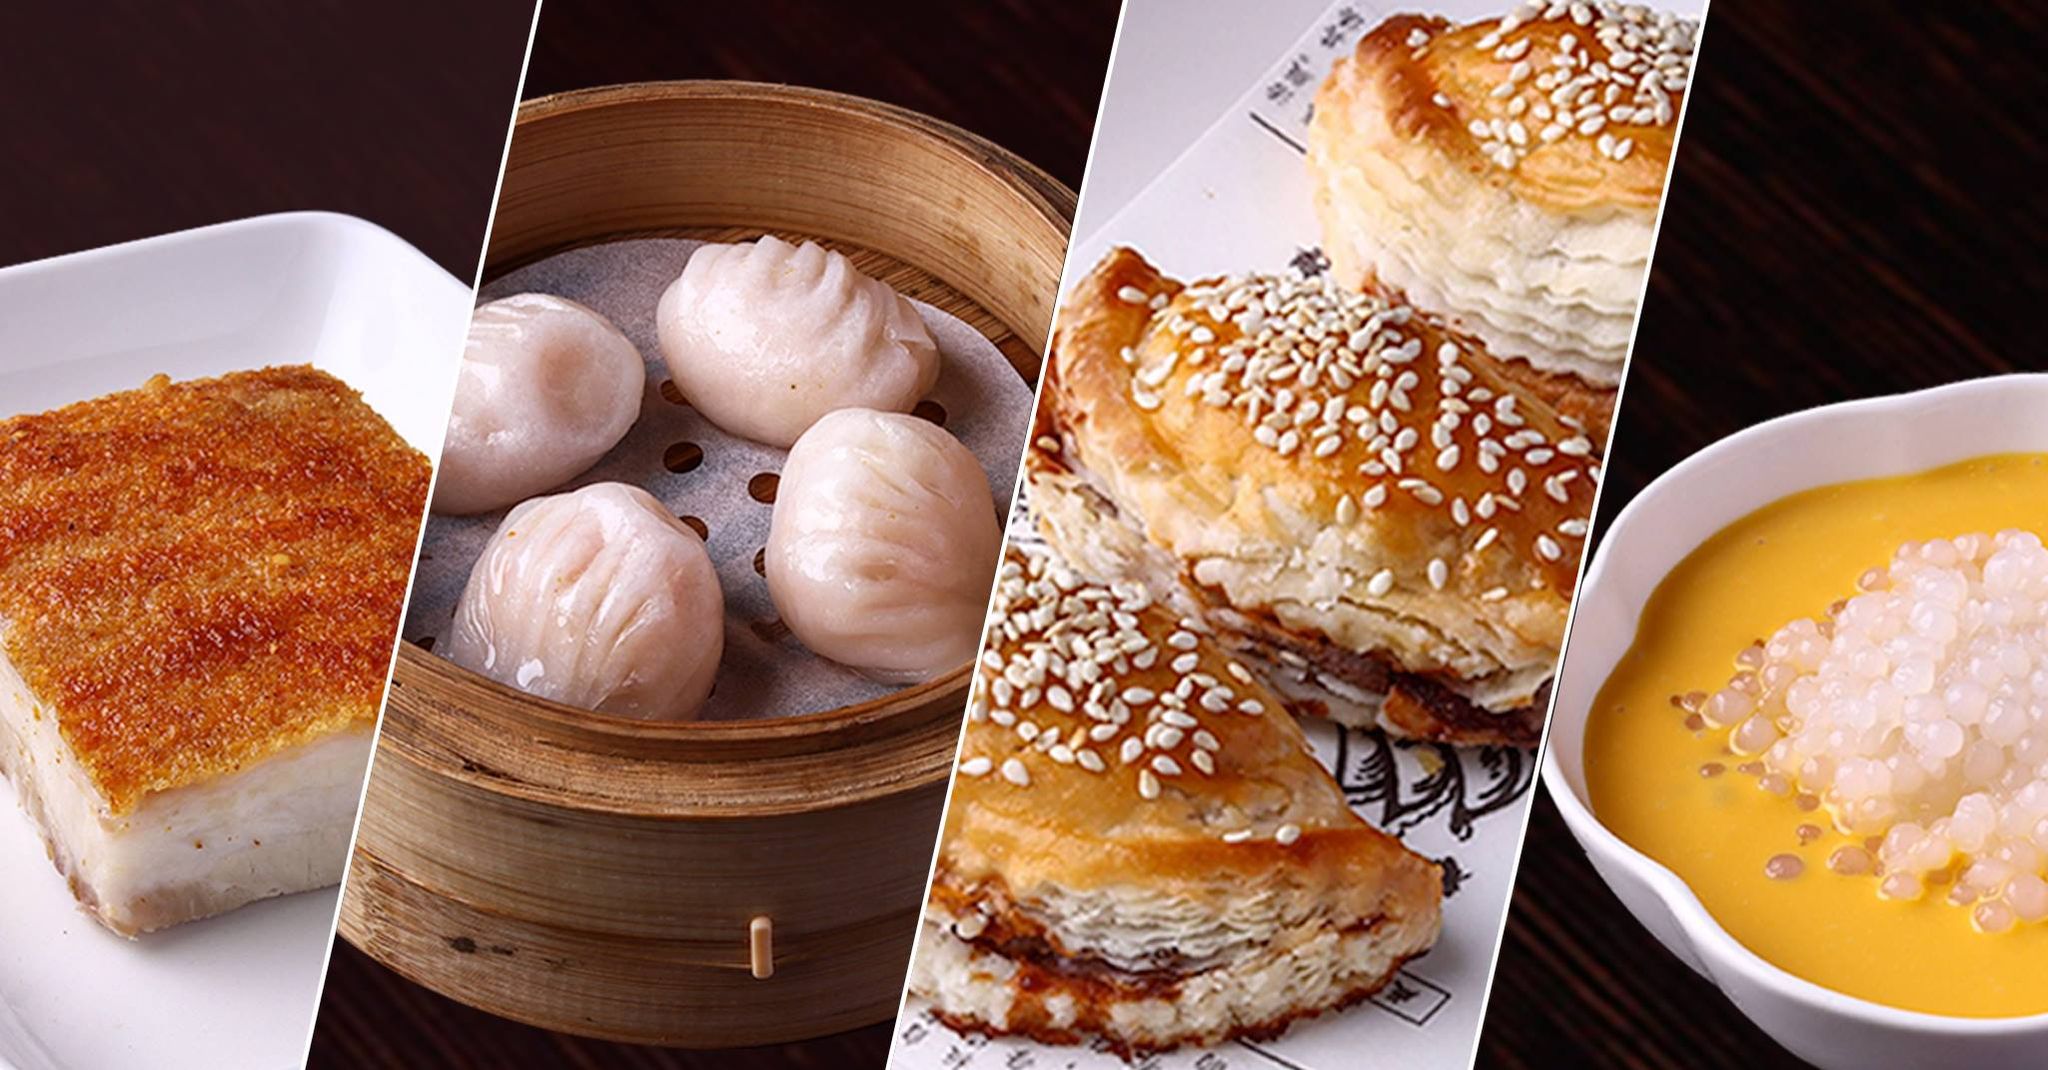 A special Father’s Day yum cha for that special Dad